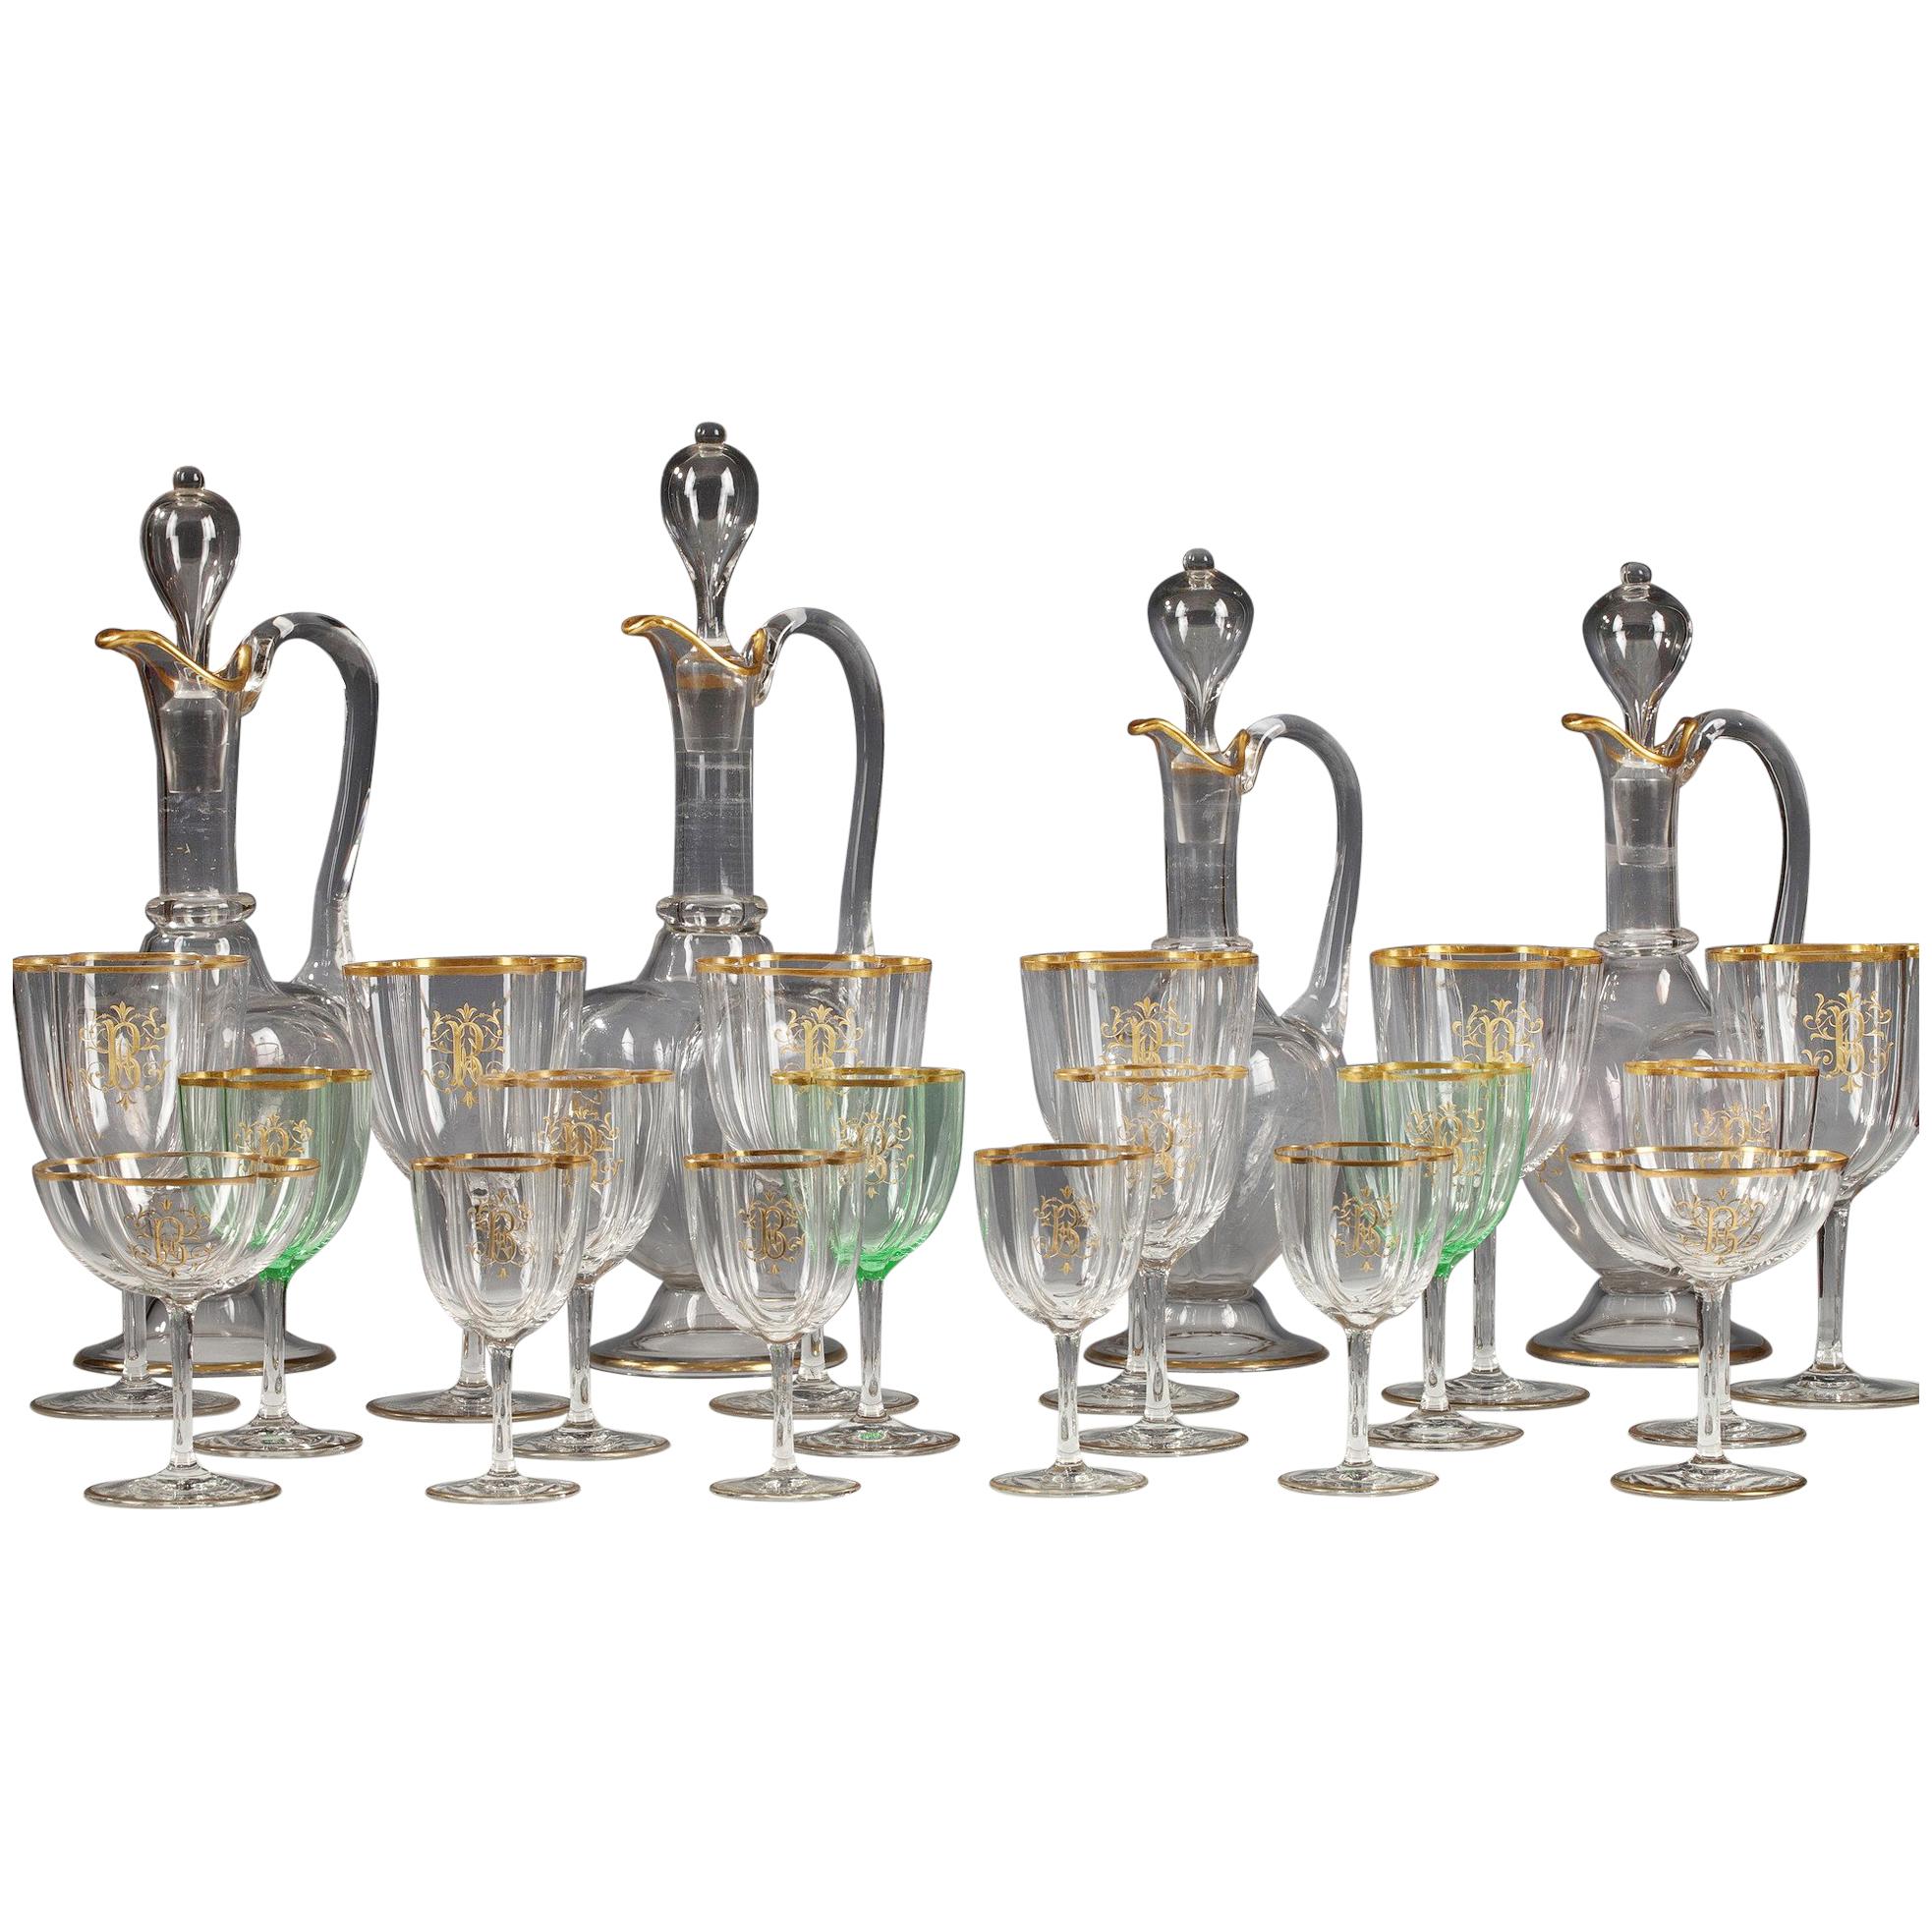 Exceptional Glasses Set Attributed to Baccarat